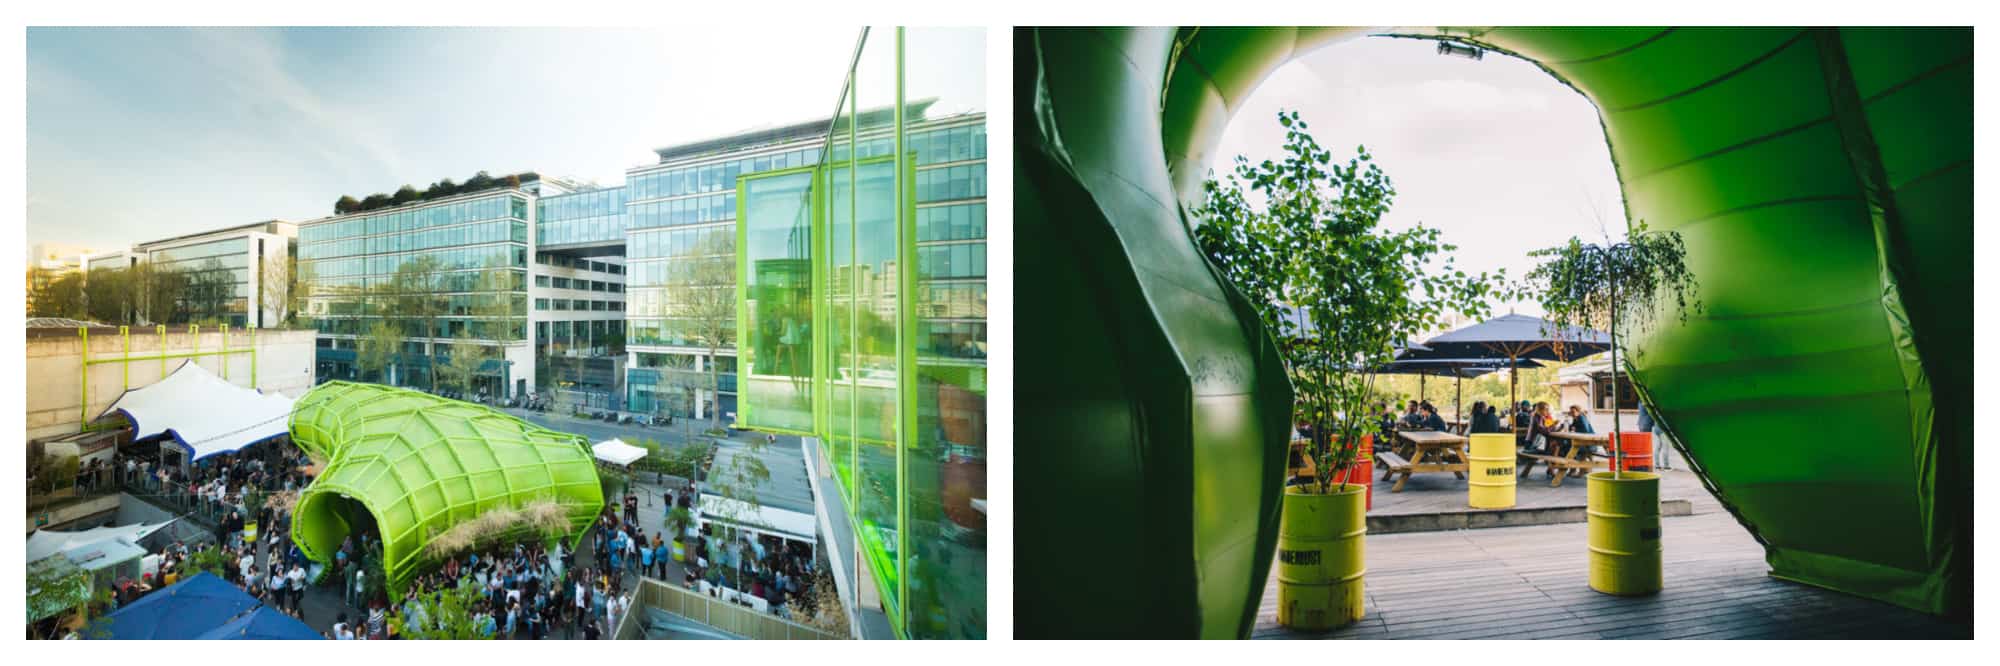 Modern glass buildings and a bright green structure outside on a terrace with people standing (left). Looking through the doorway of a bright green structure with two pot plants either side to a terrace with people sitting down at tables with umbrellas (right).